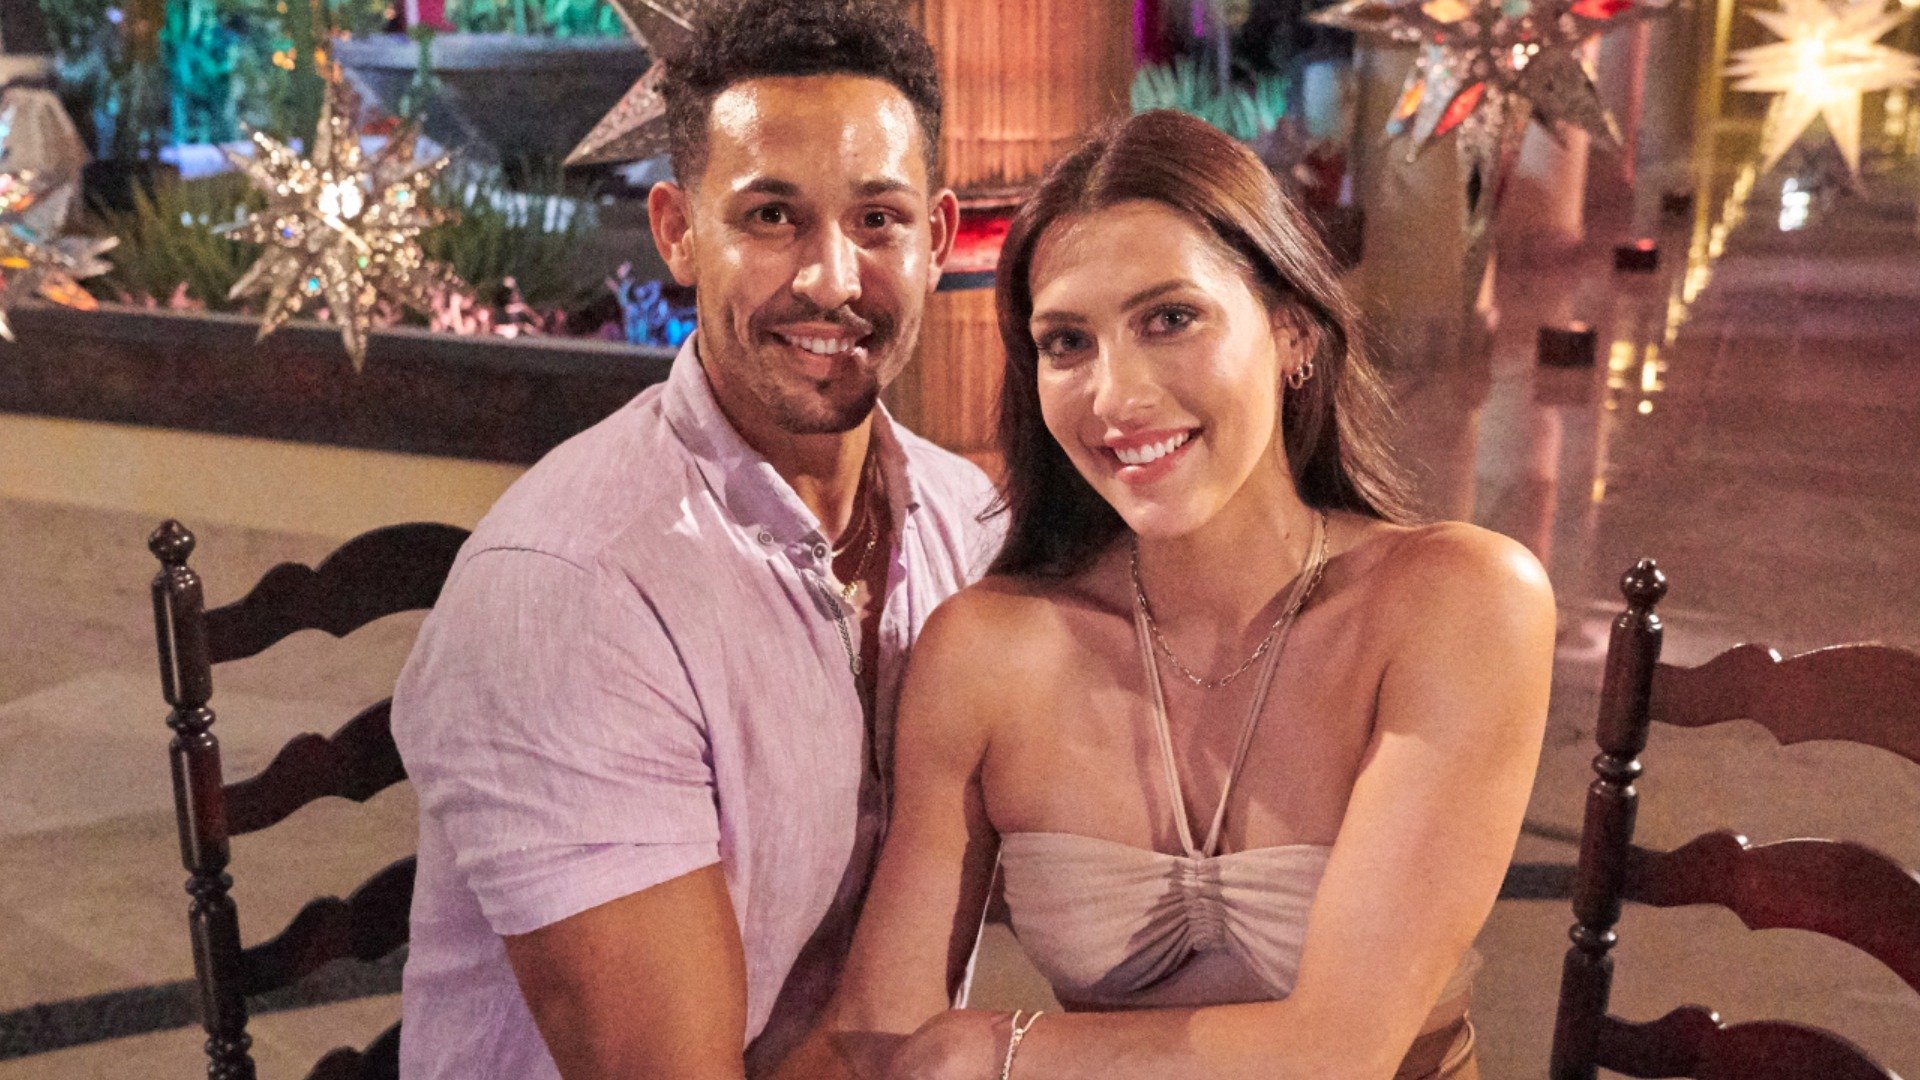 ‘Bachelor in Paradise’: Becca Kufrin and Thomas Jacobs Tease Major Engagement and Marriage Plans Together